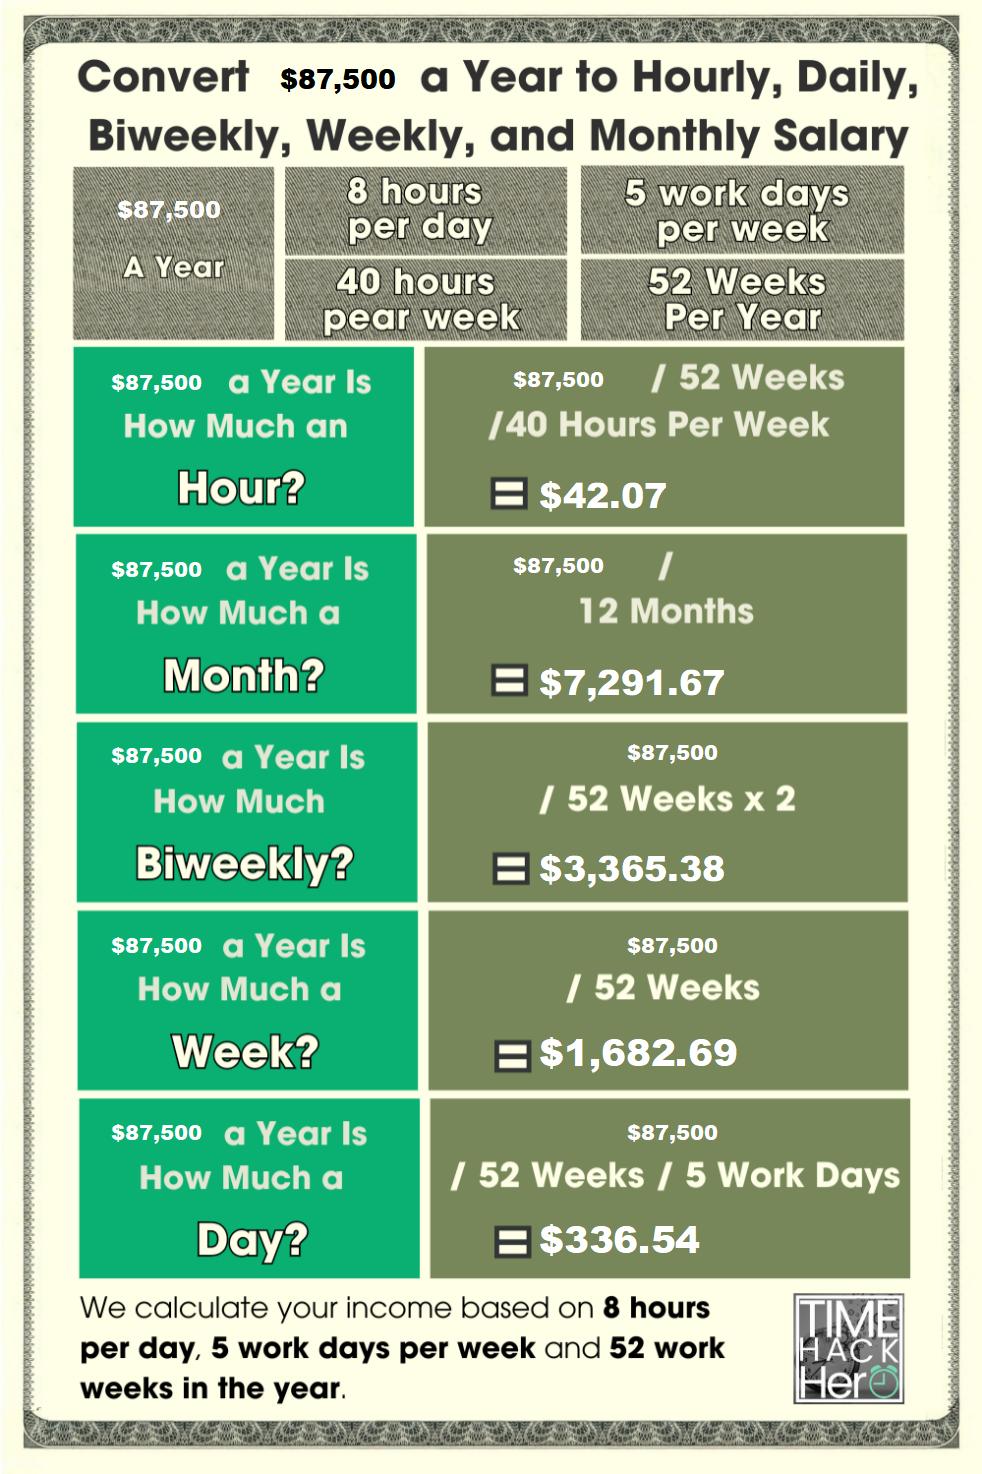 Convert $87500 a Year to Hourly, Daily, Biweekly, Weekly, and Monthly Salary